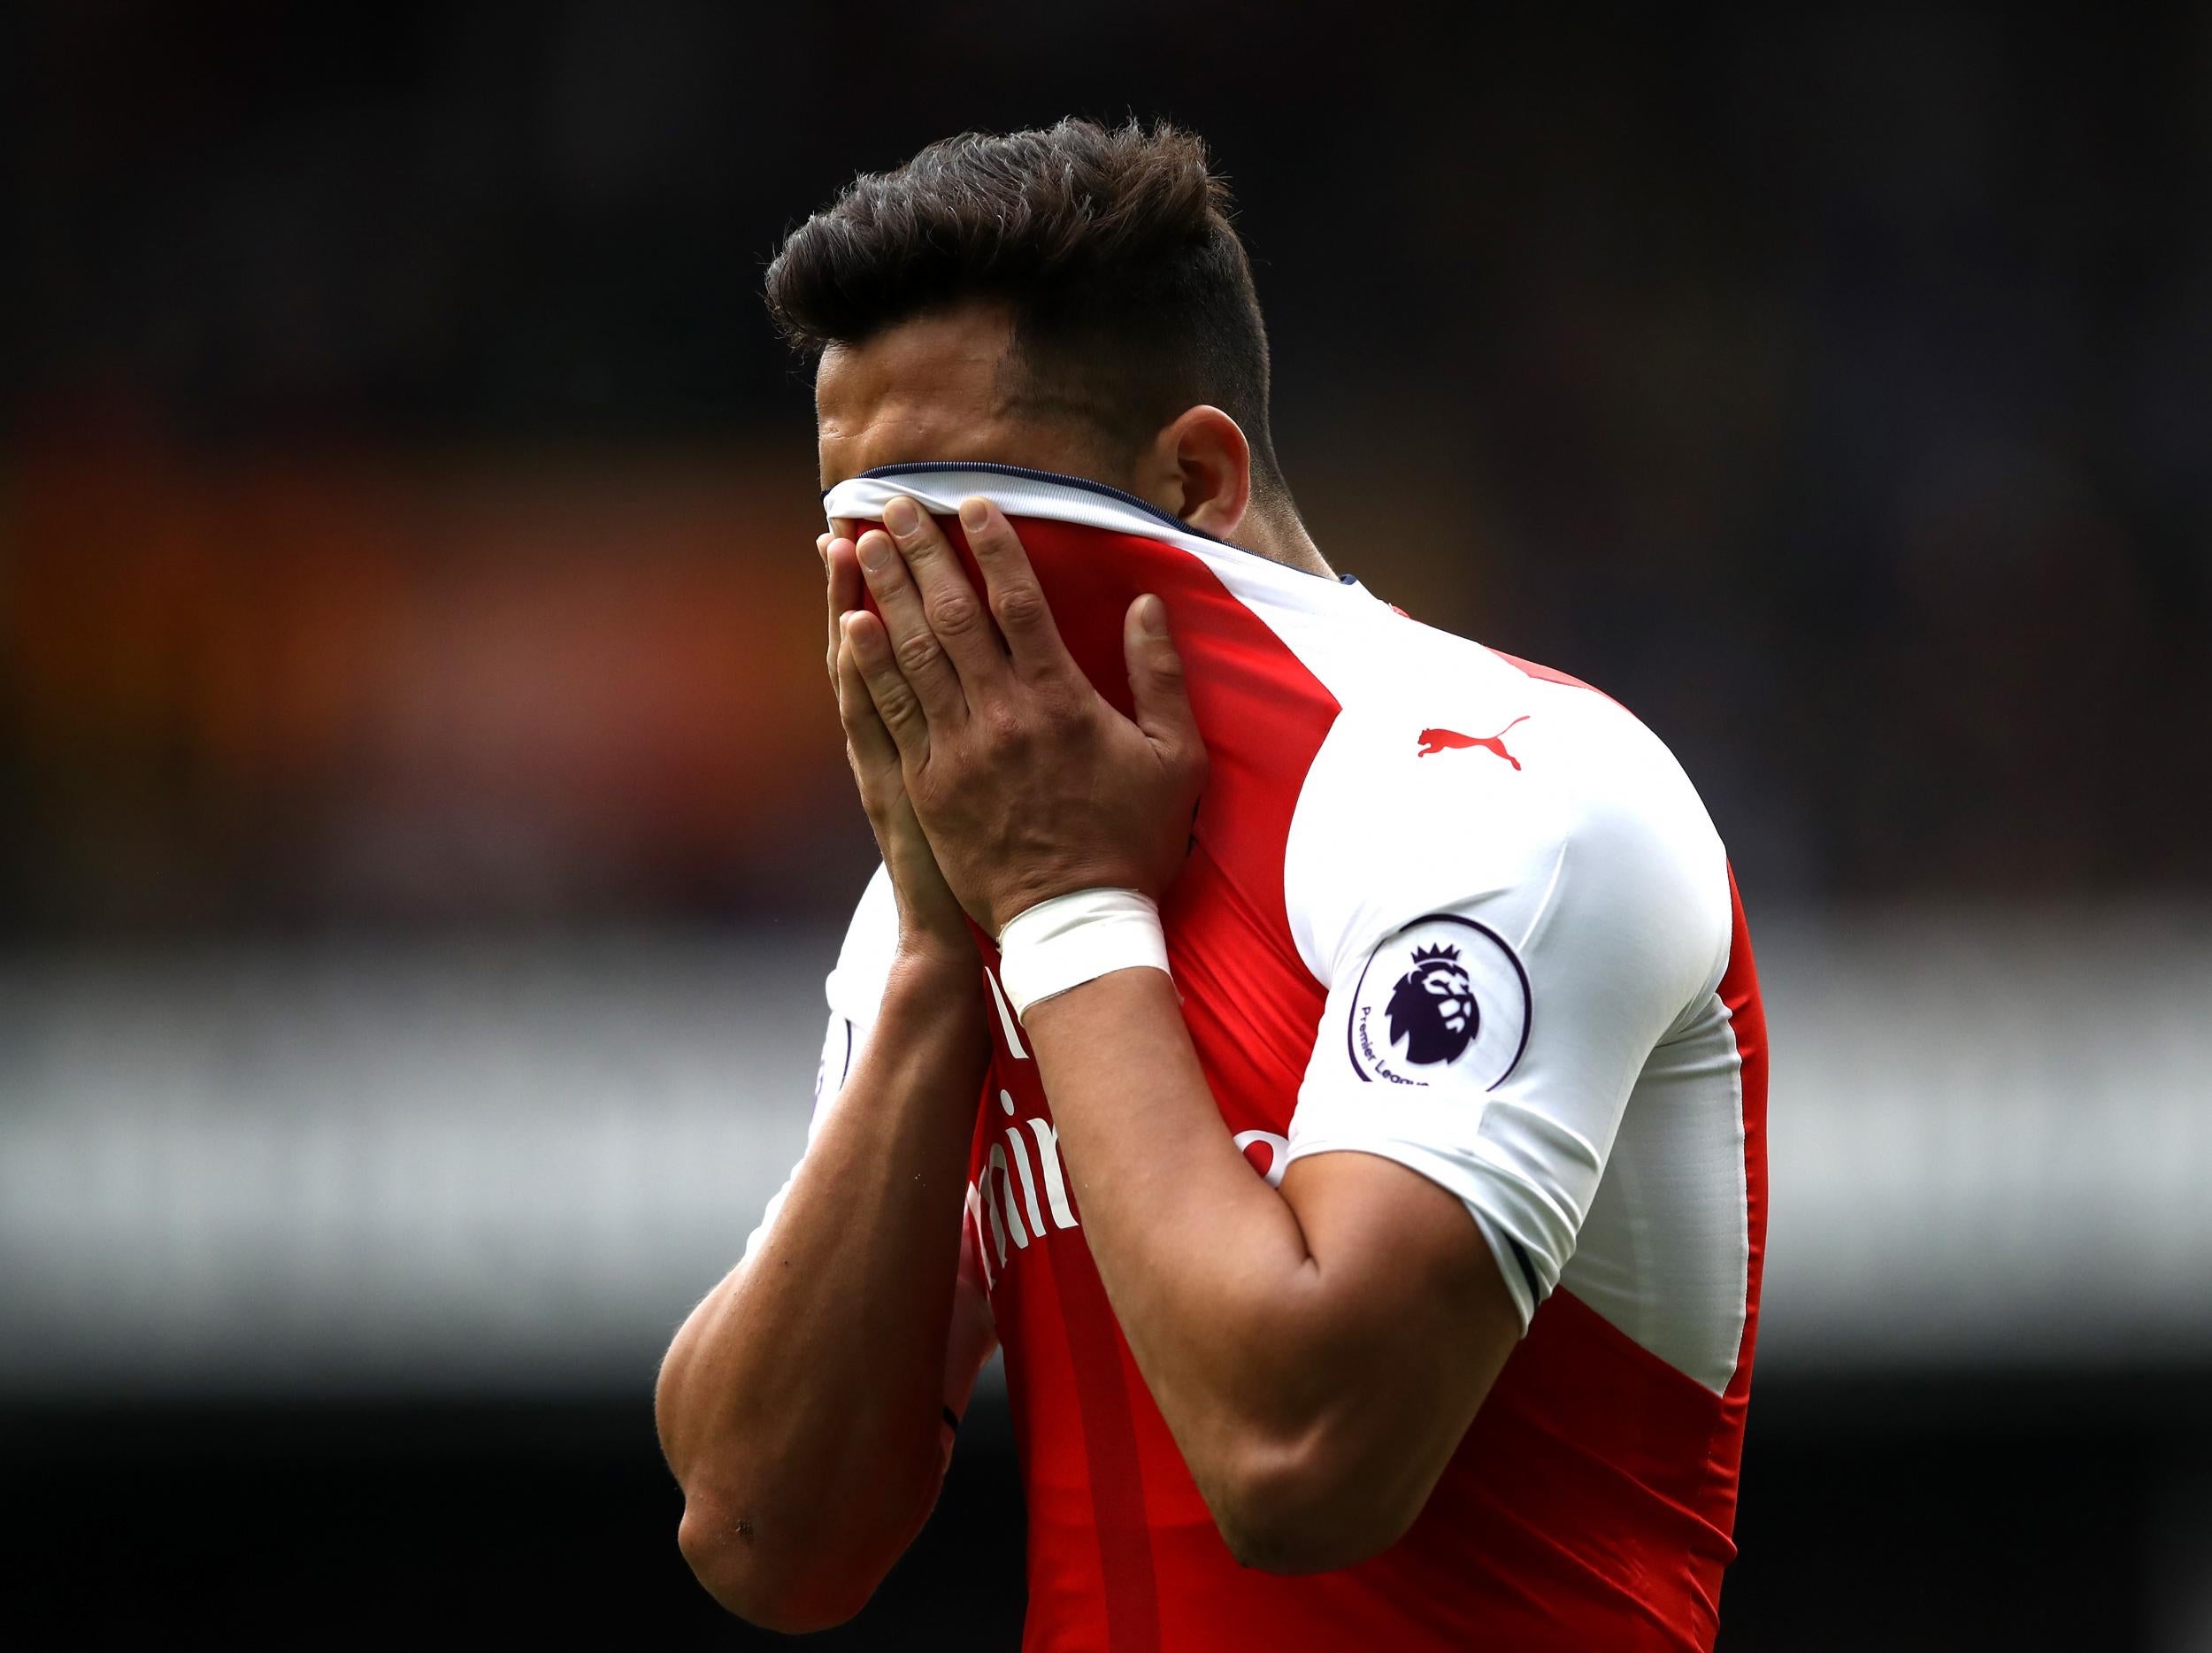 PSG are hoping to take advantage of Sanchez's contract uncertainty